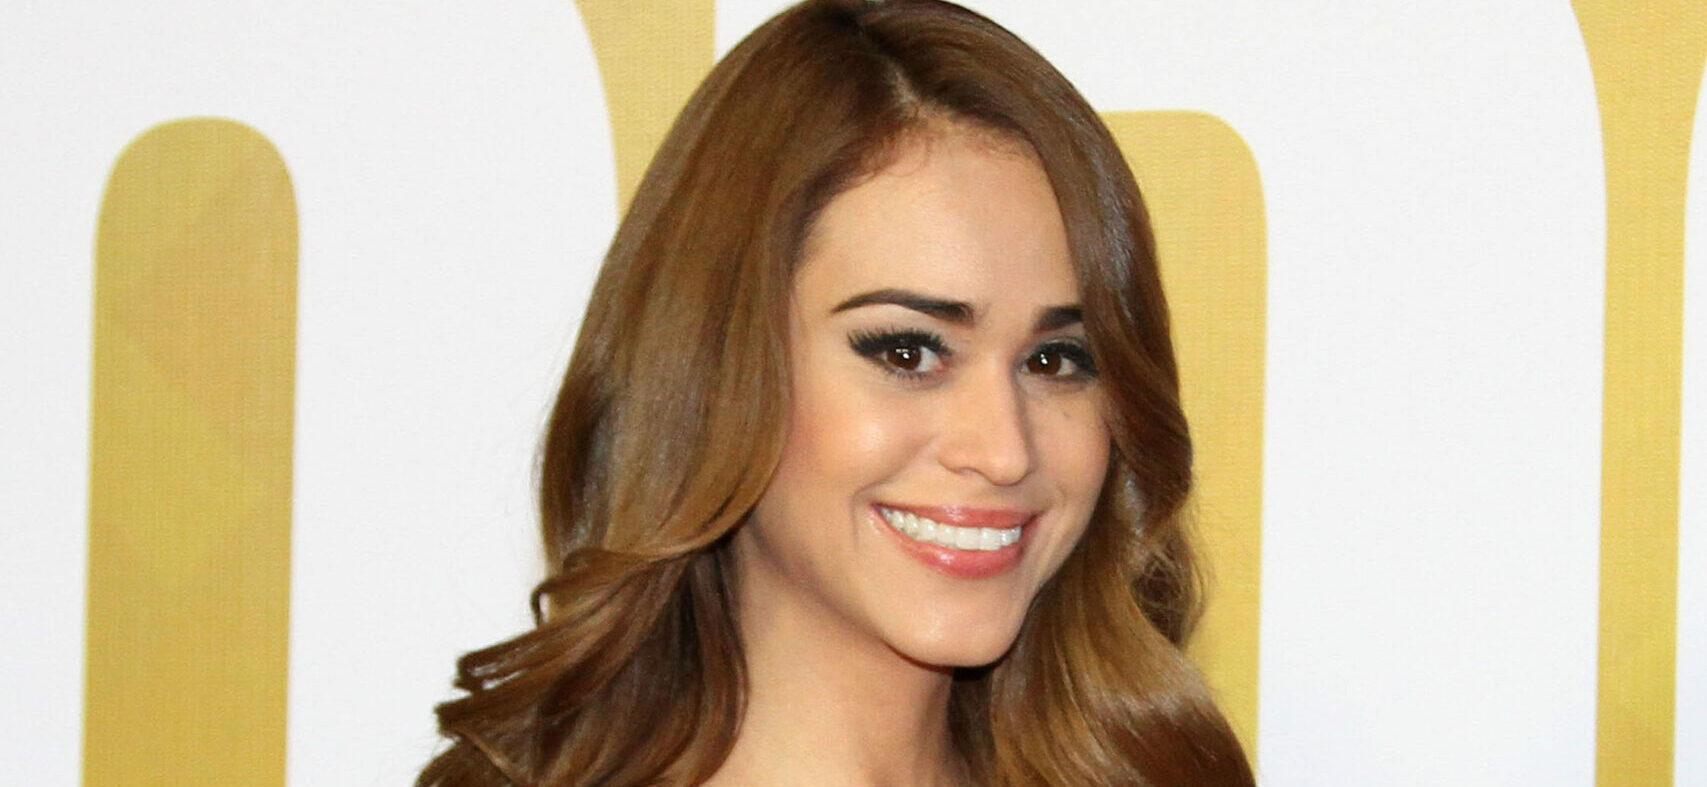 ‘Mexican Weather Girl’ Yanet Garcia In Her Purple Thong Looks Cheeky